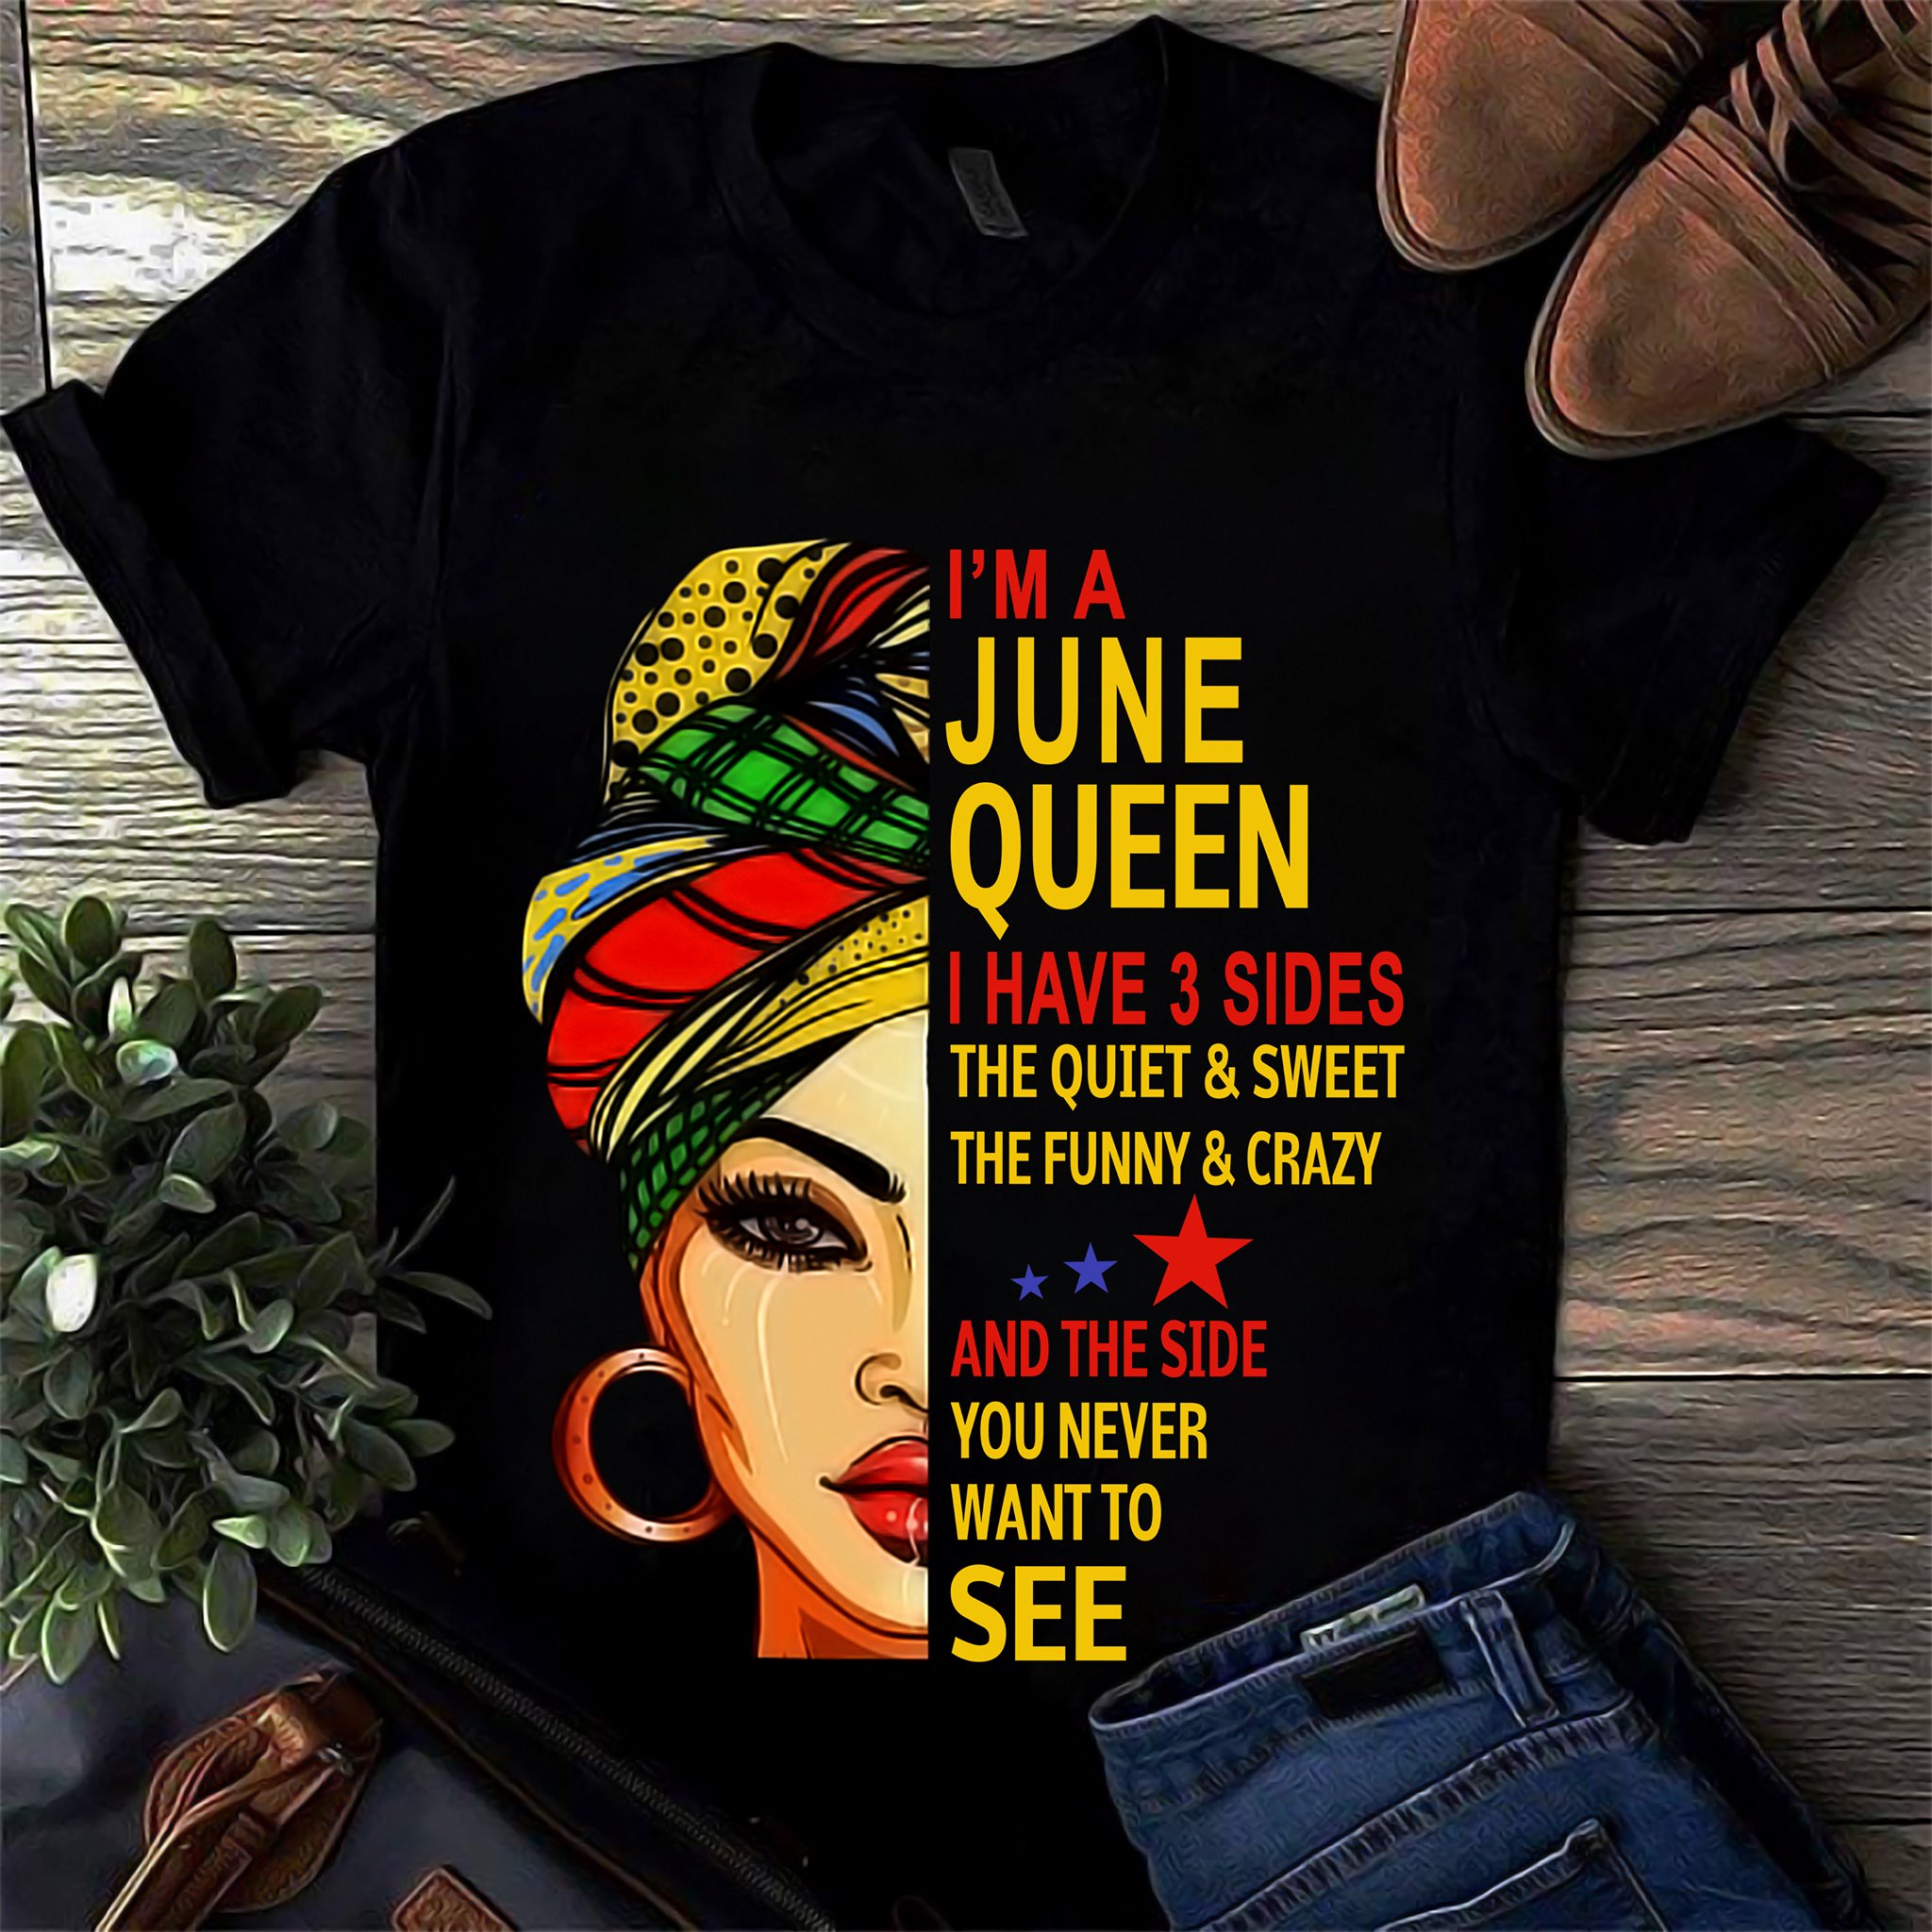 I'm June queen - Woman's personality